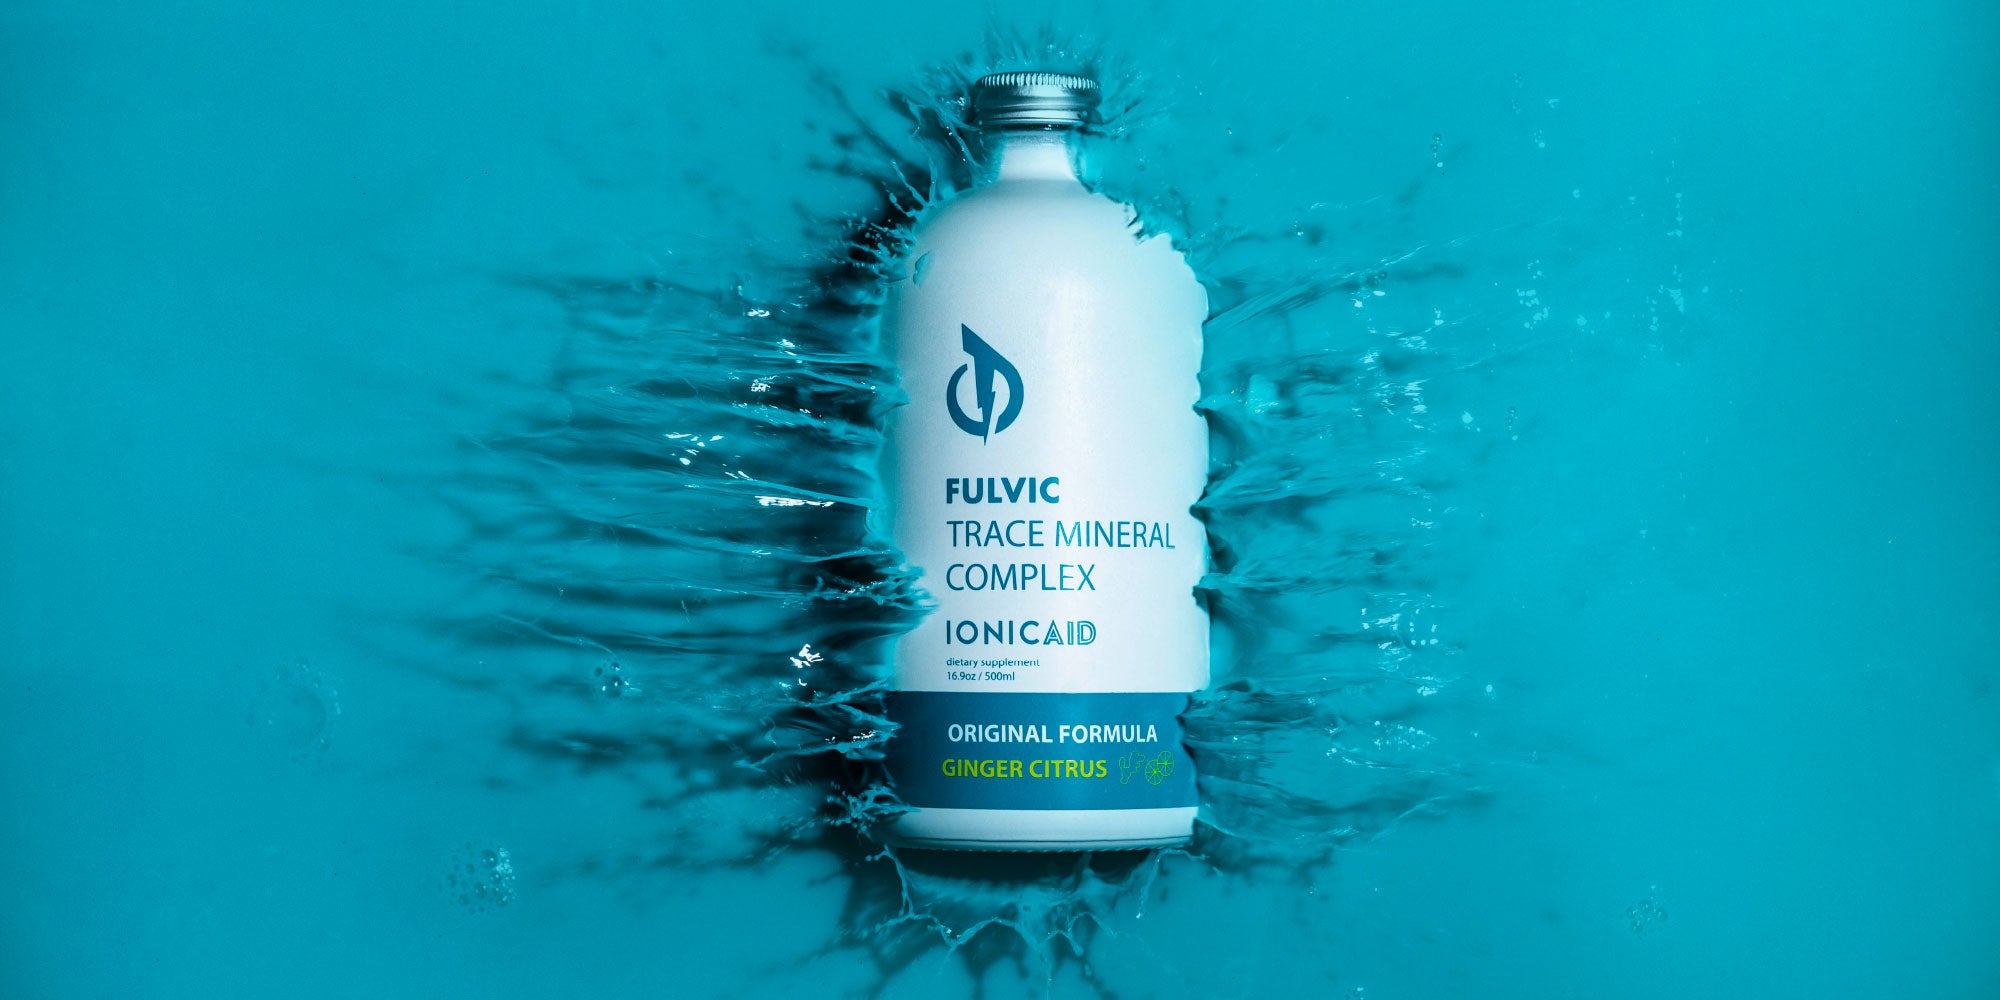 Ionicaid Fulvic Trace Mineral Complex